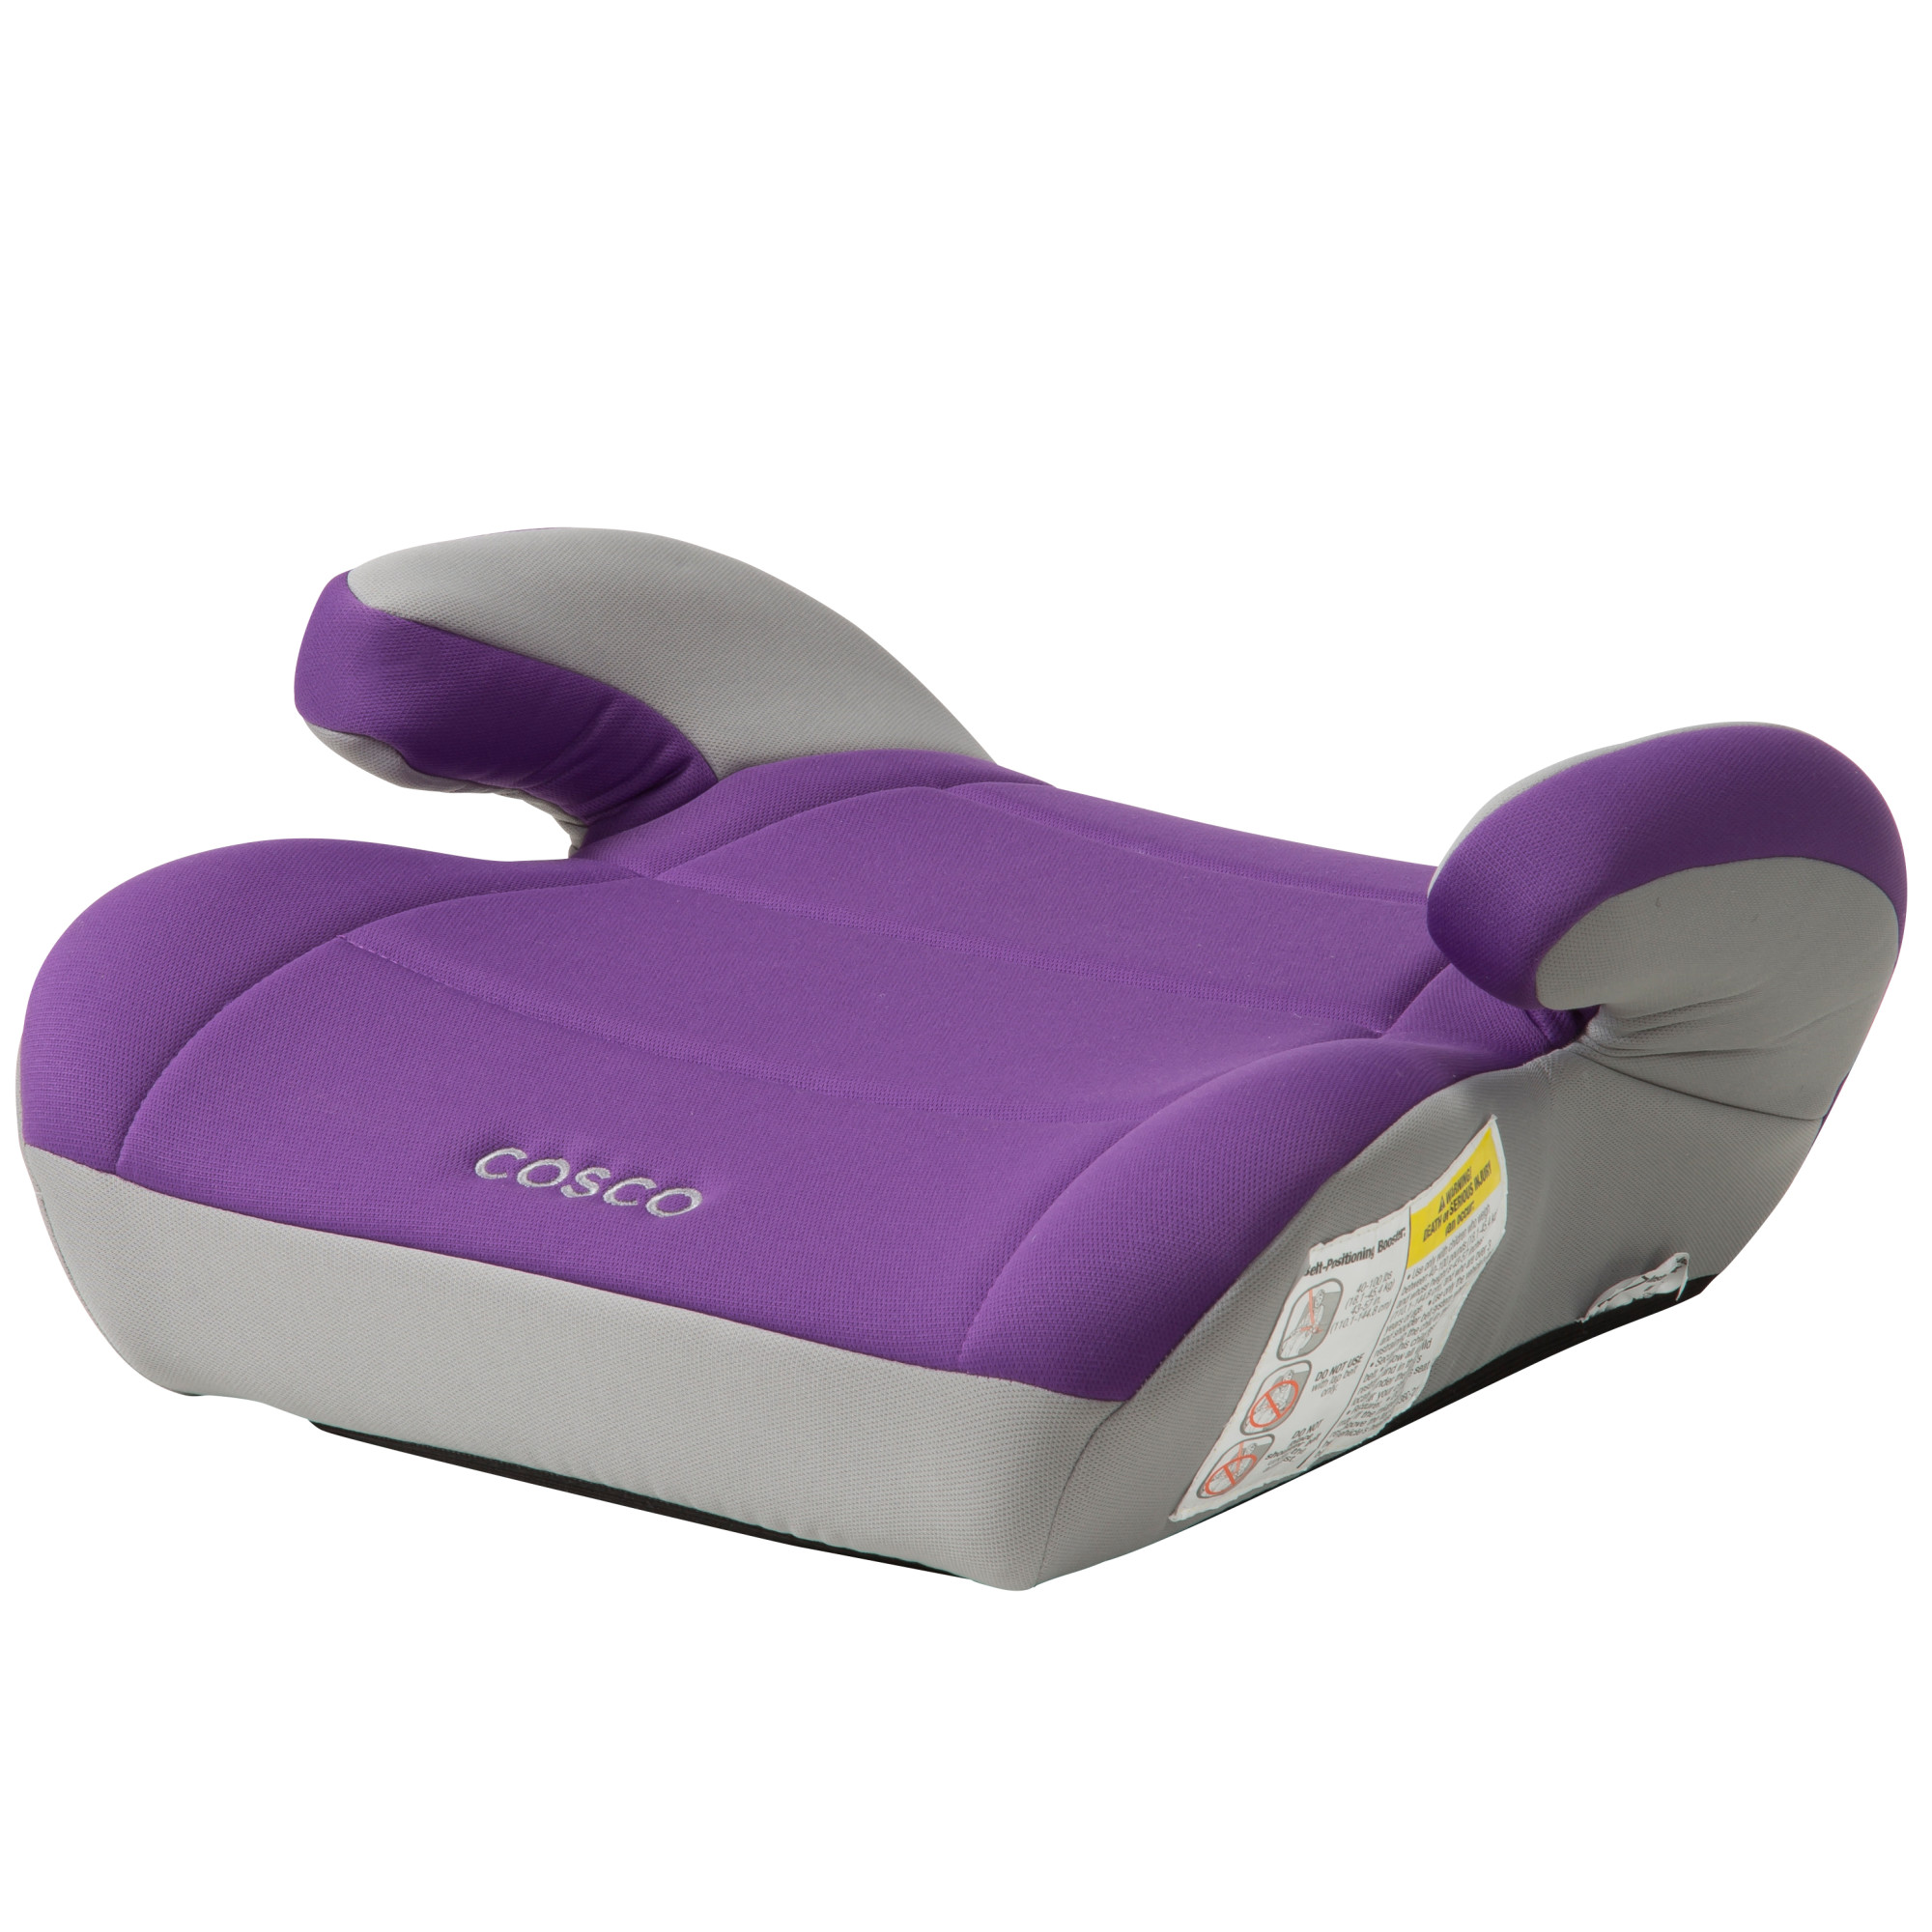 Cosco Topside Booster Car Seat - image 4 of 4